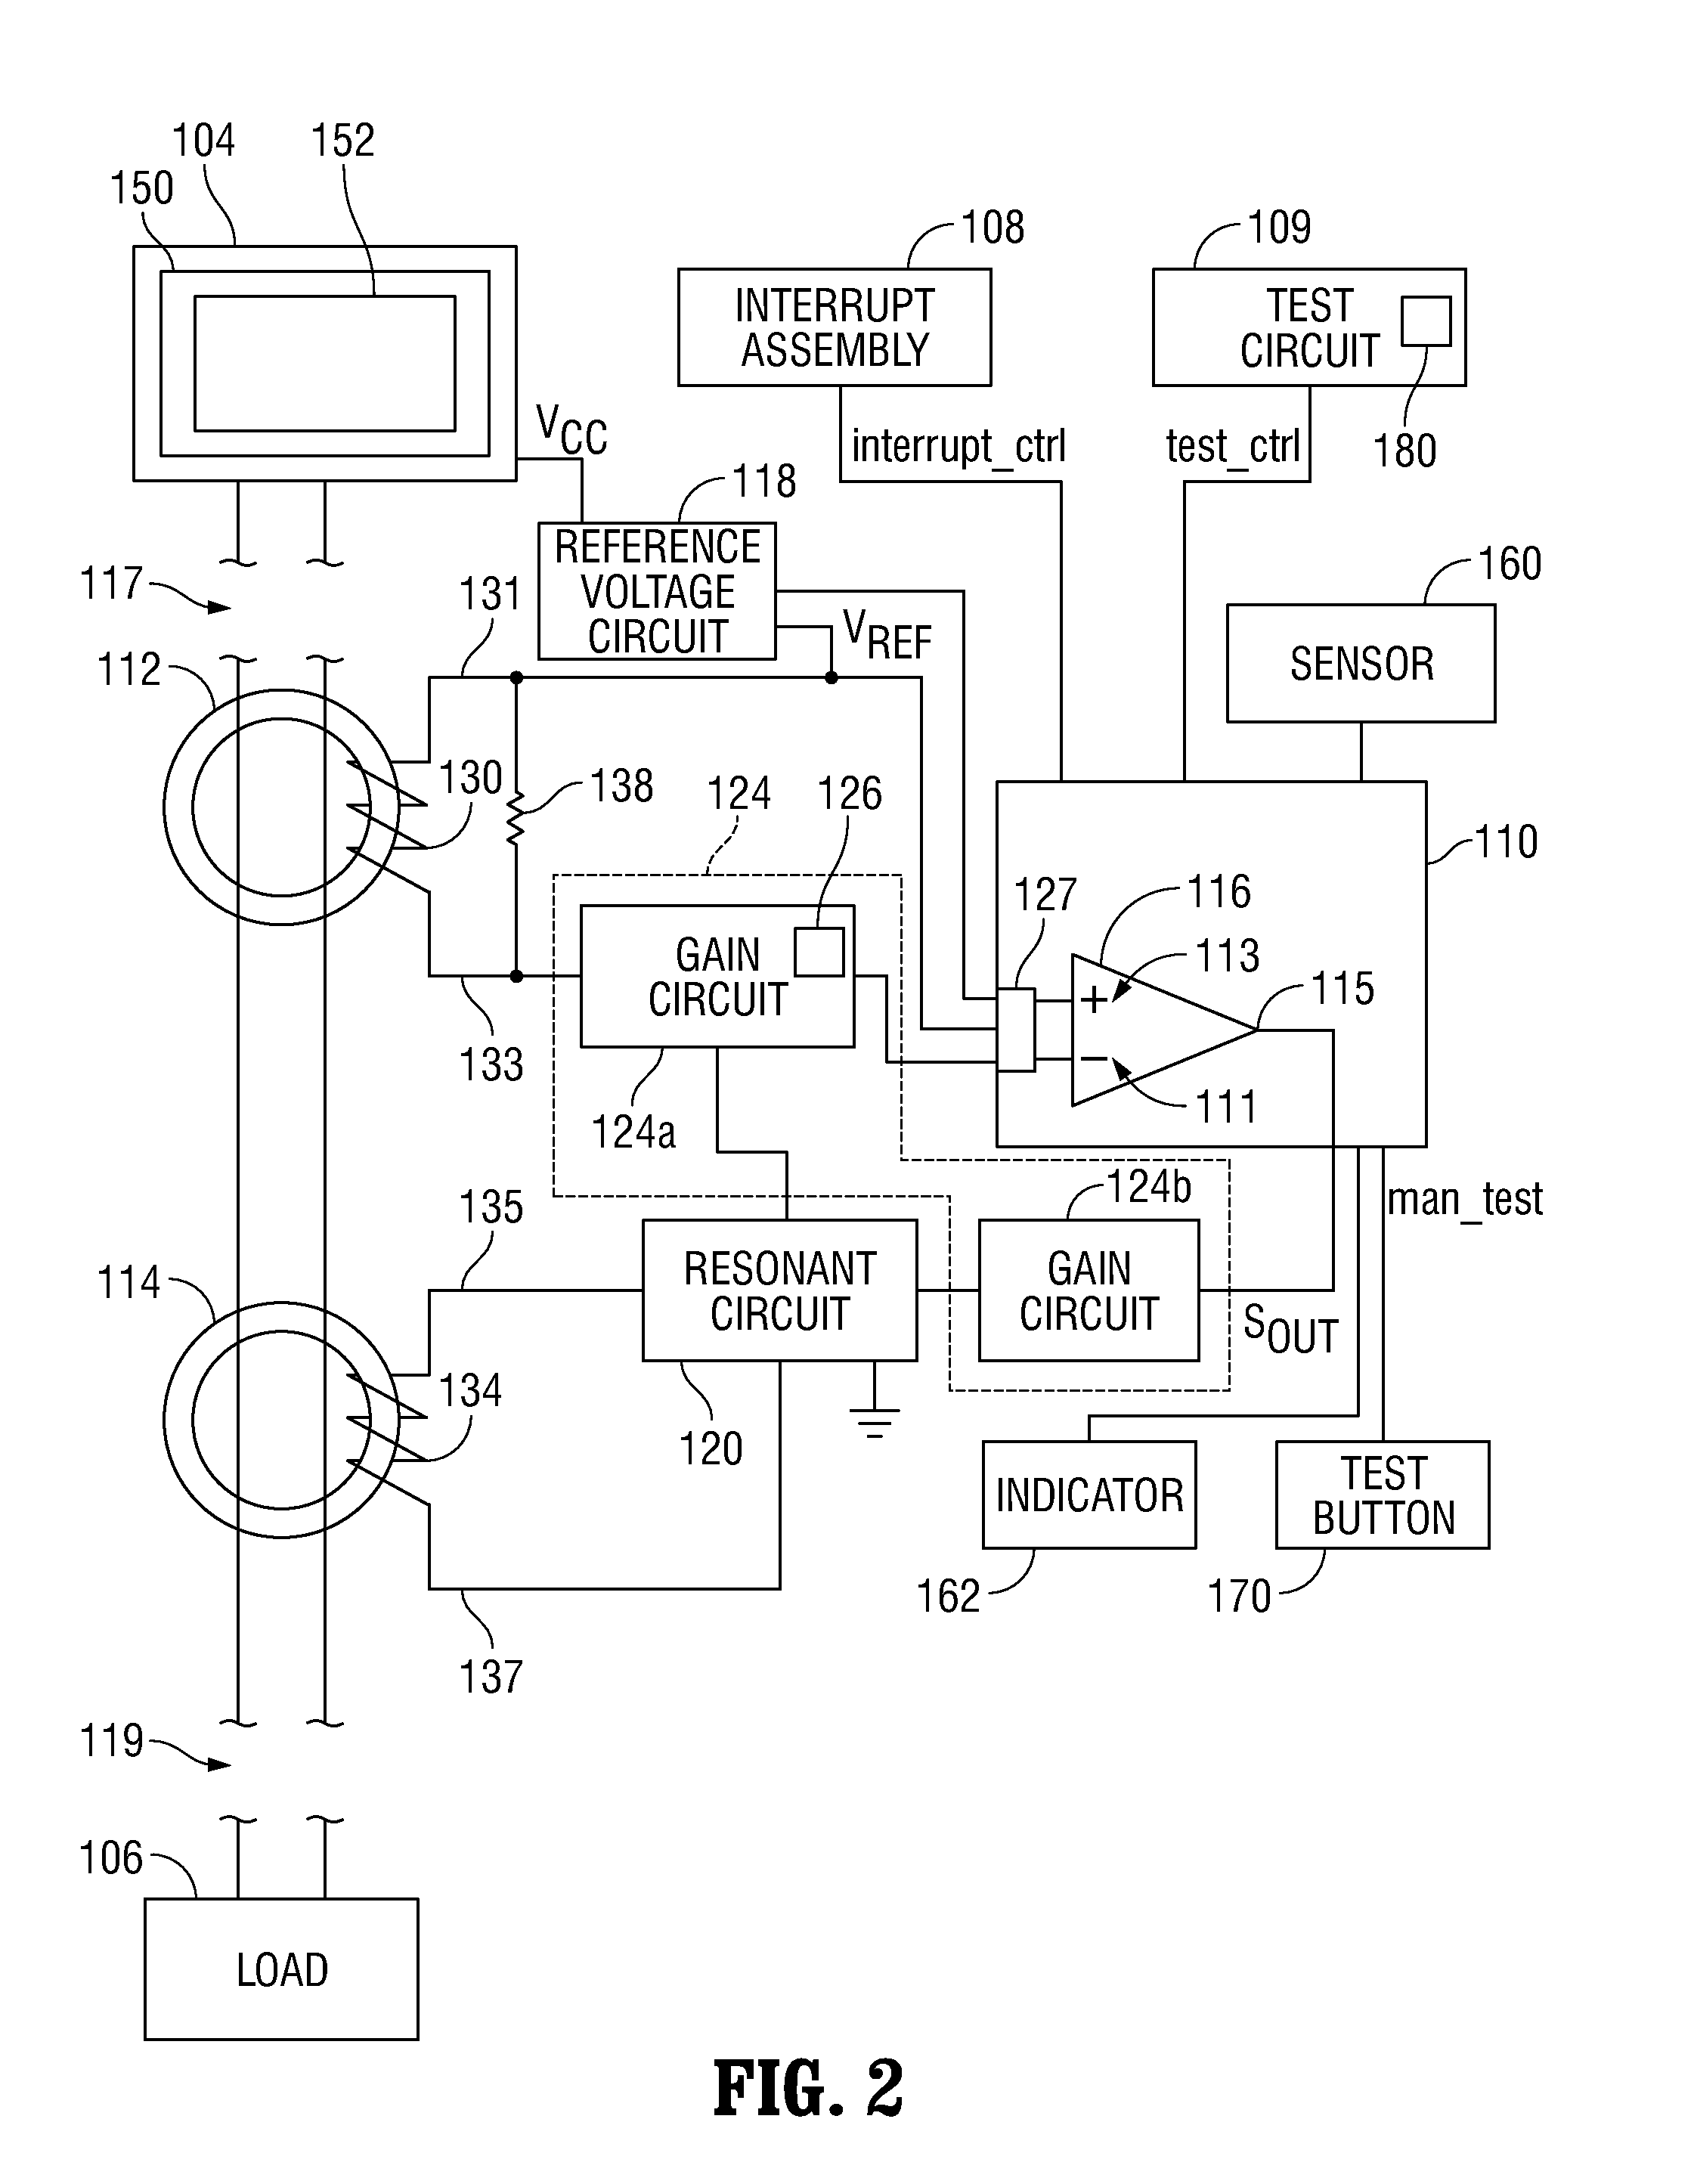 Processor-based circuit interrupting devices